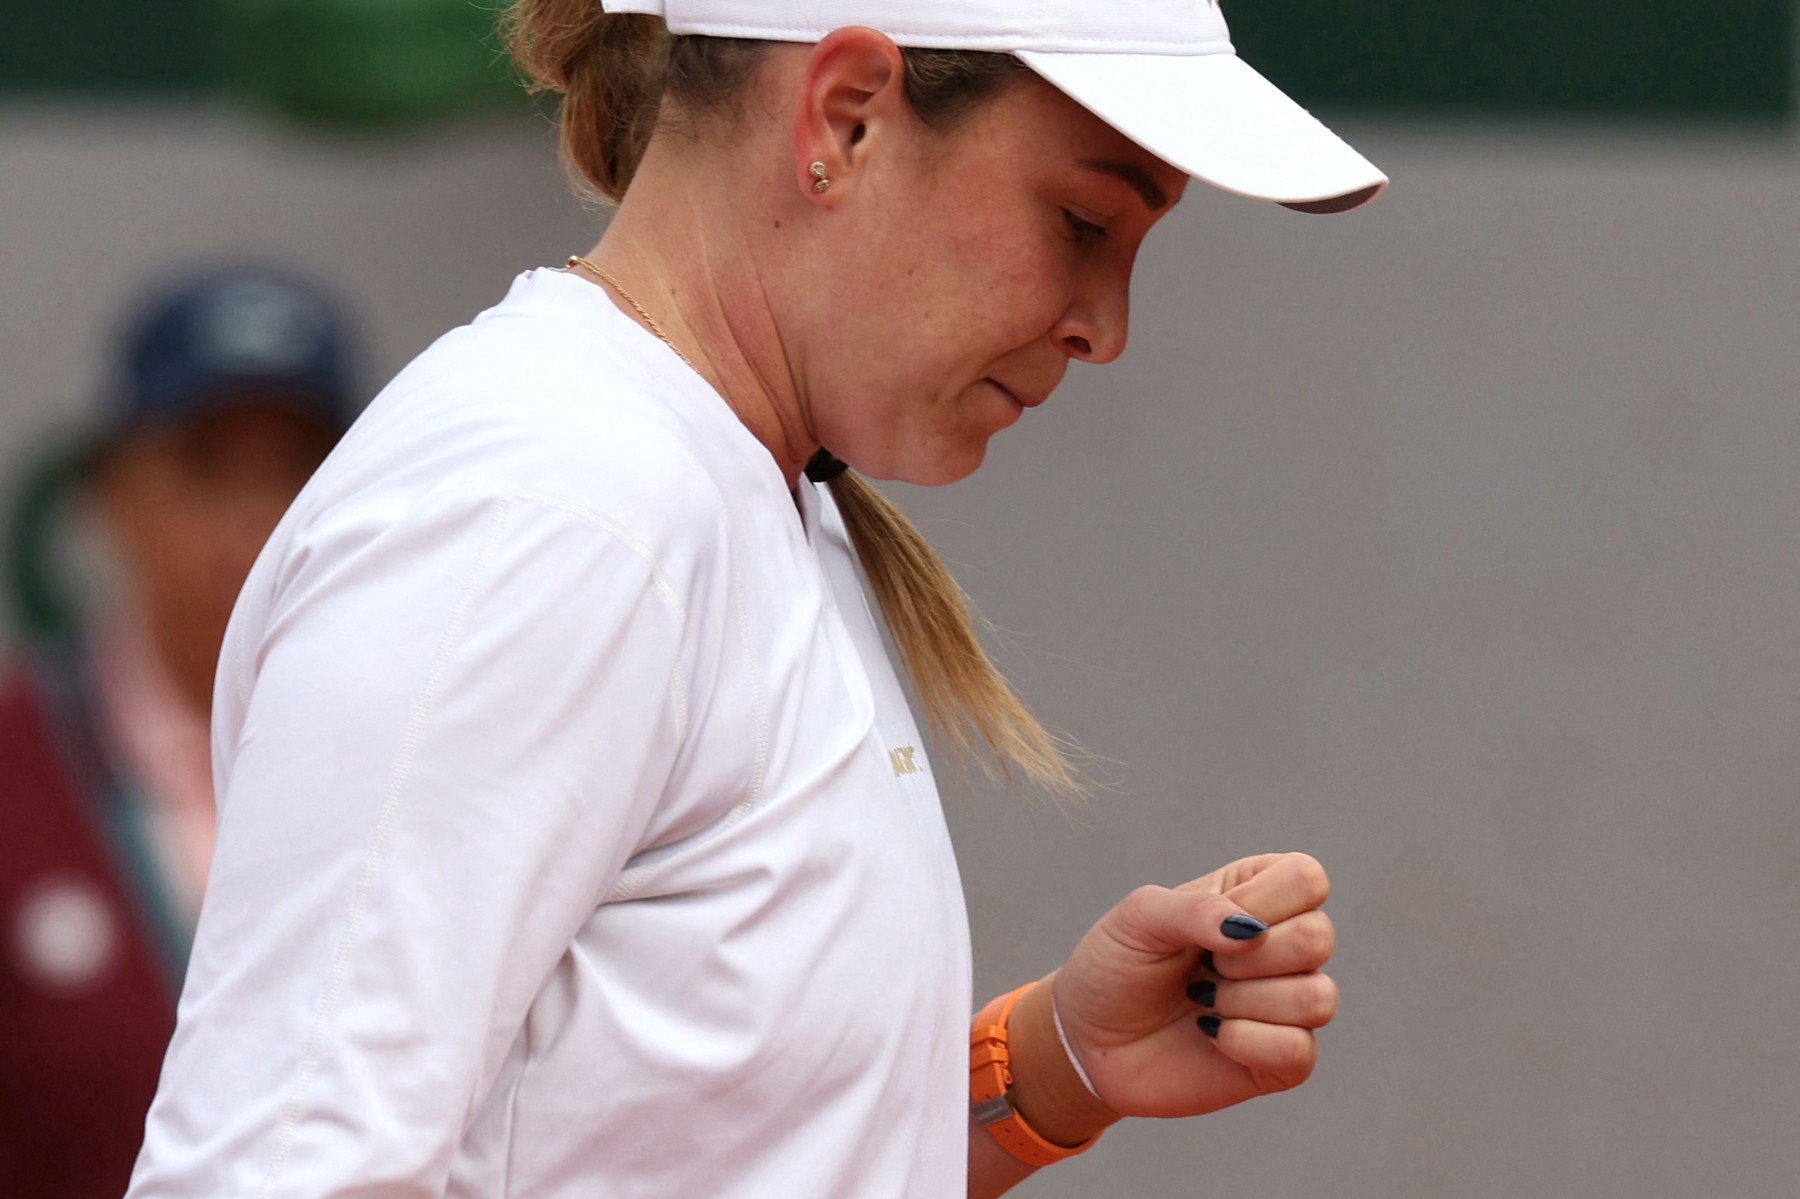 Croatia's Donna Vekic reacts after a point during her women's singles match against Ukraine's Marta Kostyuk on day five of the French Open tennis tournament at the Roland Garros Complex in Paris on May 30, 2024.,Image: 877558124, License: Rights-managed, Restrictions: , Model Release: no, Credit line: ALAIN JOCARD / AFP / Profimedia